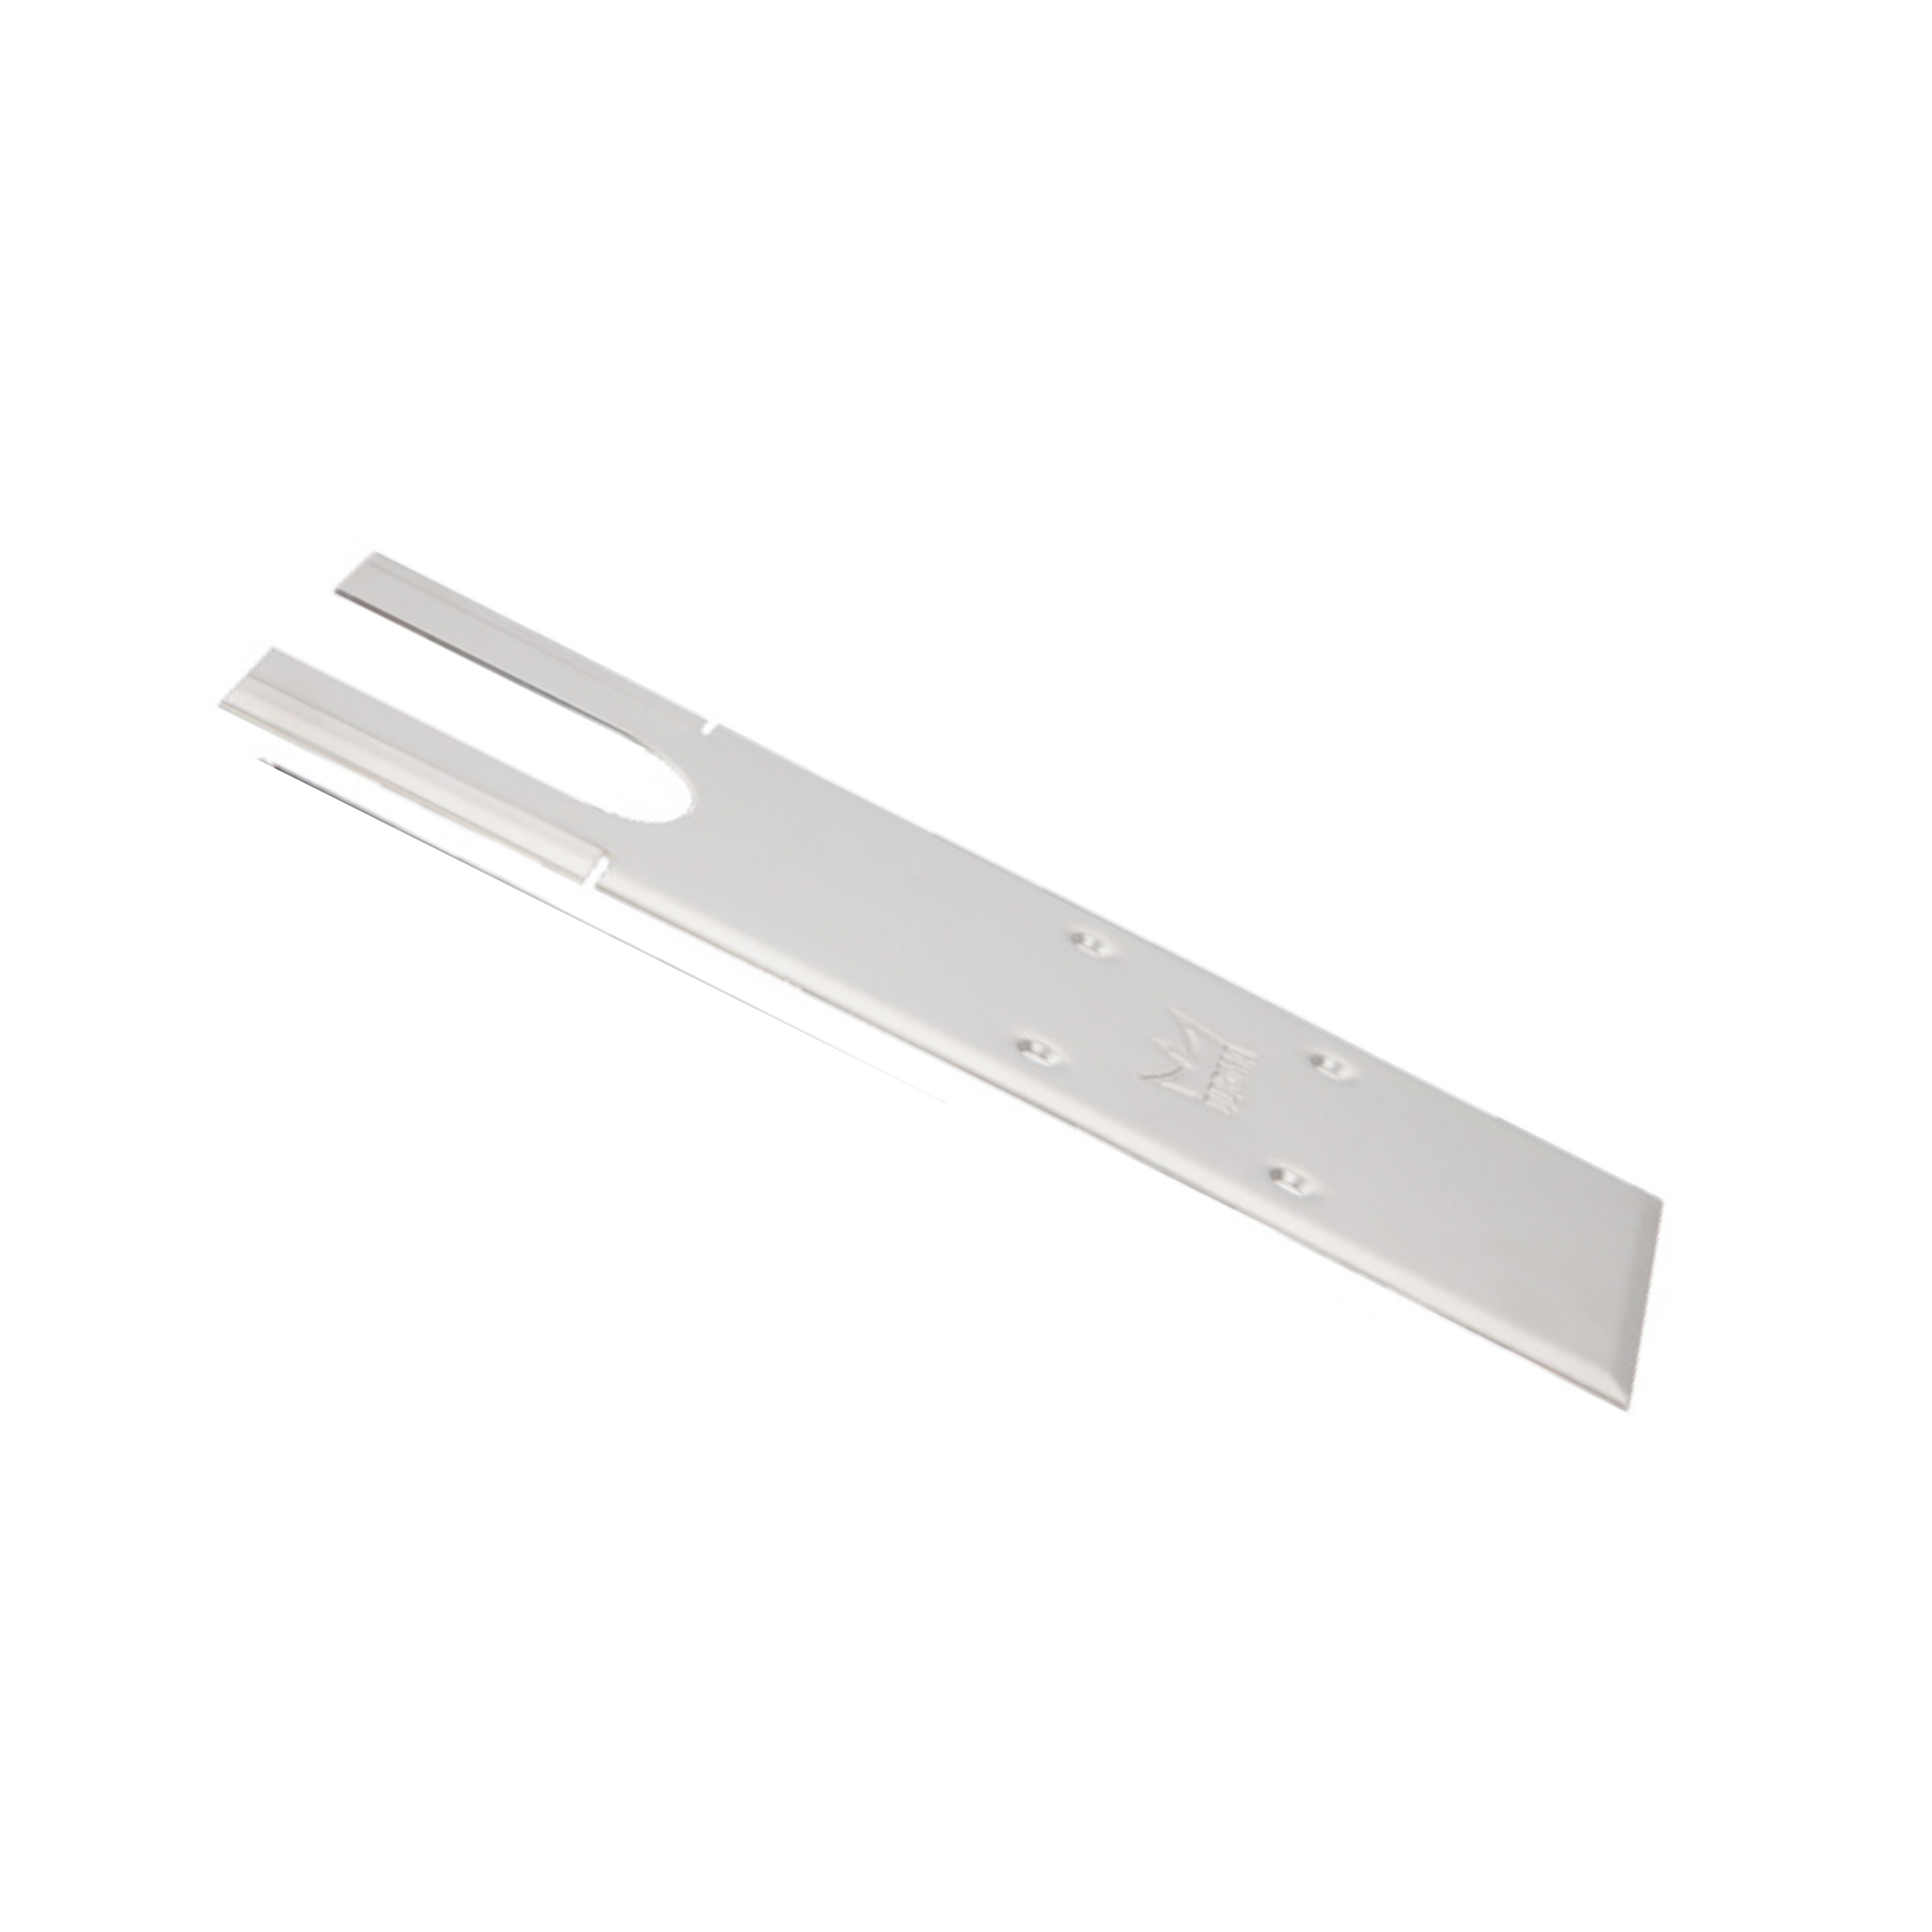 BTS 84 Cover Plate 8410, Cover Plate, Stainless Steel, DORMAKABA